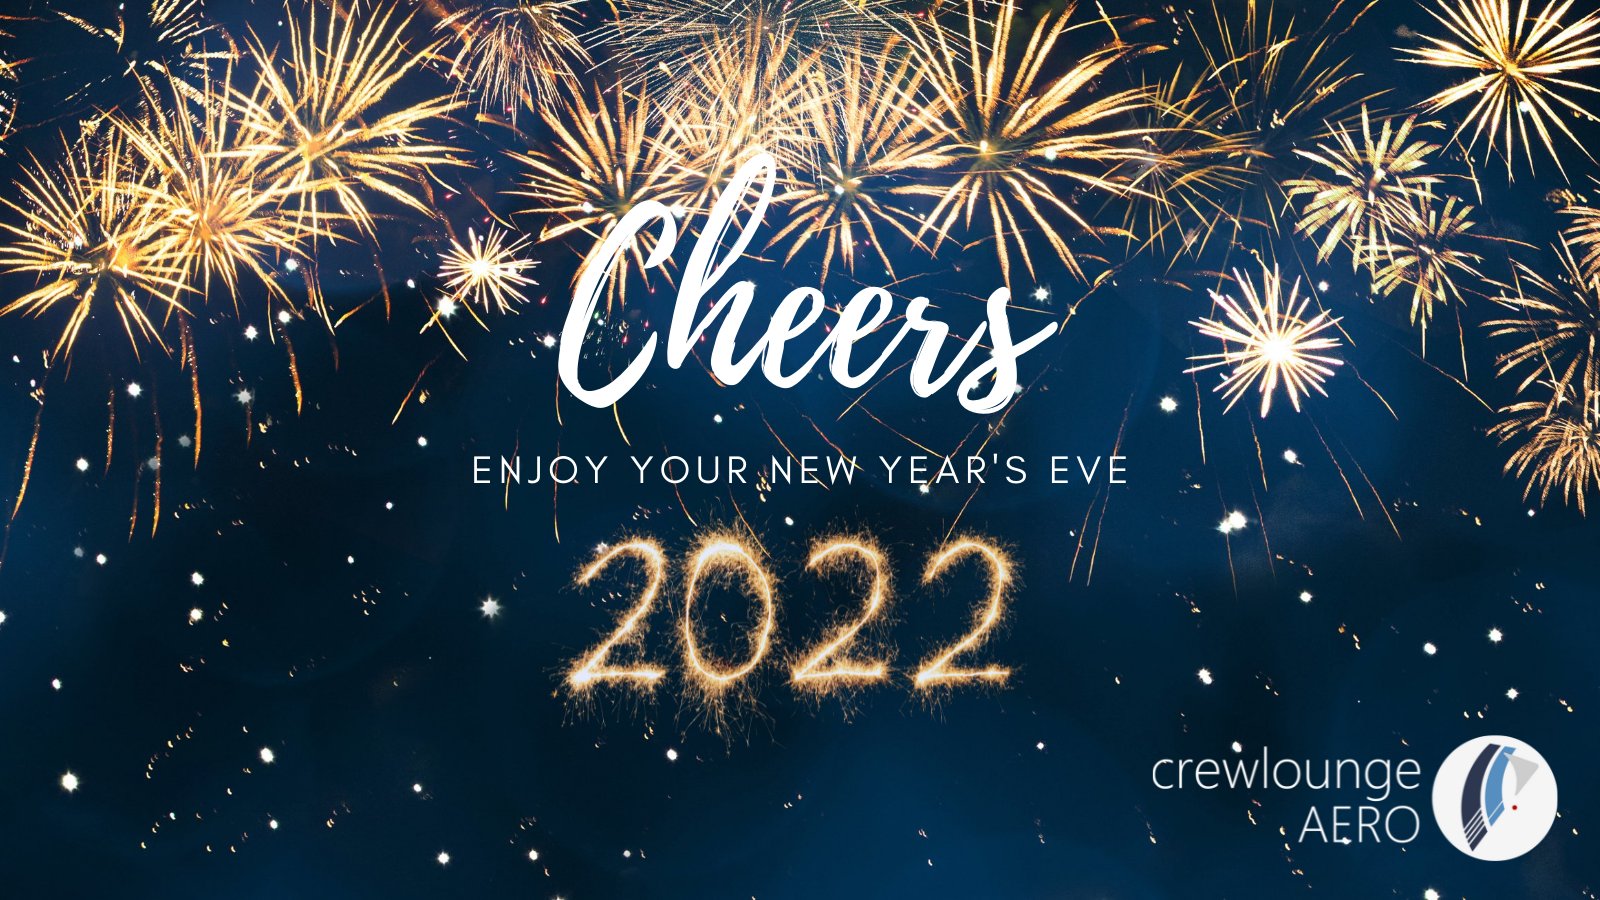 Crewlounge Aero Crewlounge Aero Wishes You A Super New Year S Eve With Friends Family Or With The Crew Somewhere In The Sky Happynewyear22 Crewlounge Pilotlife T Co 6qvjwodiem Twitter